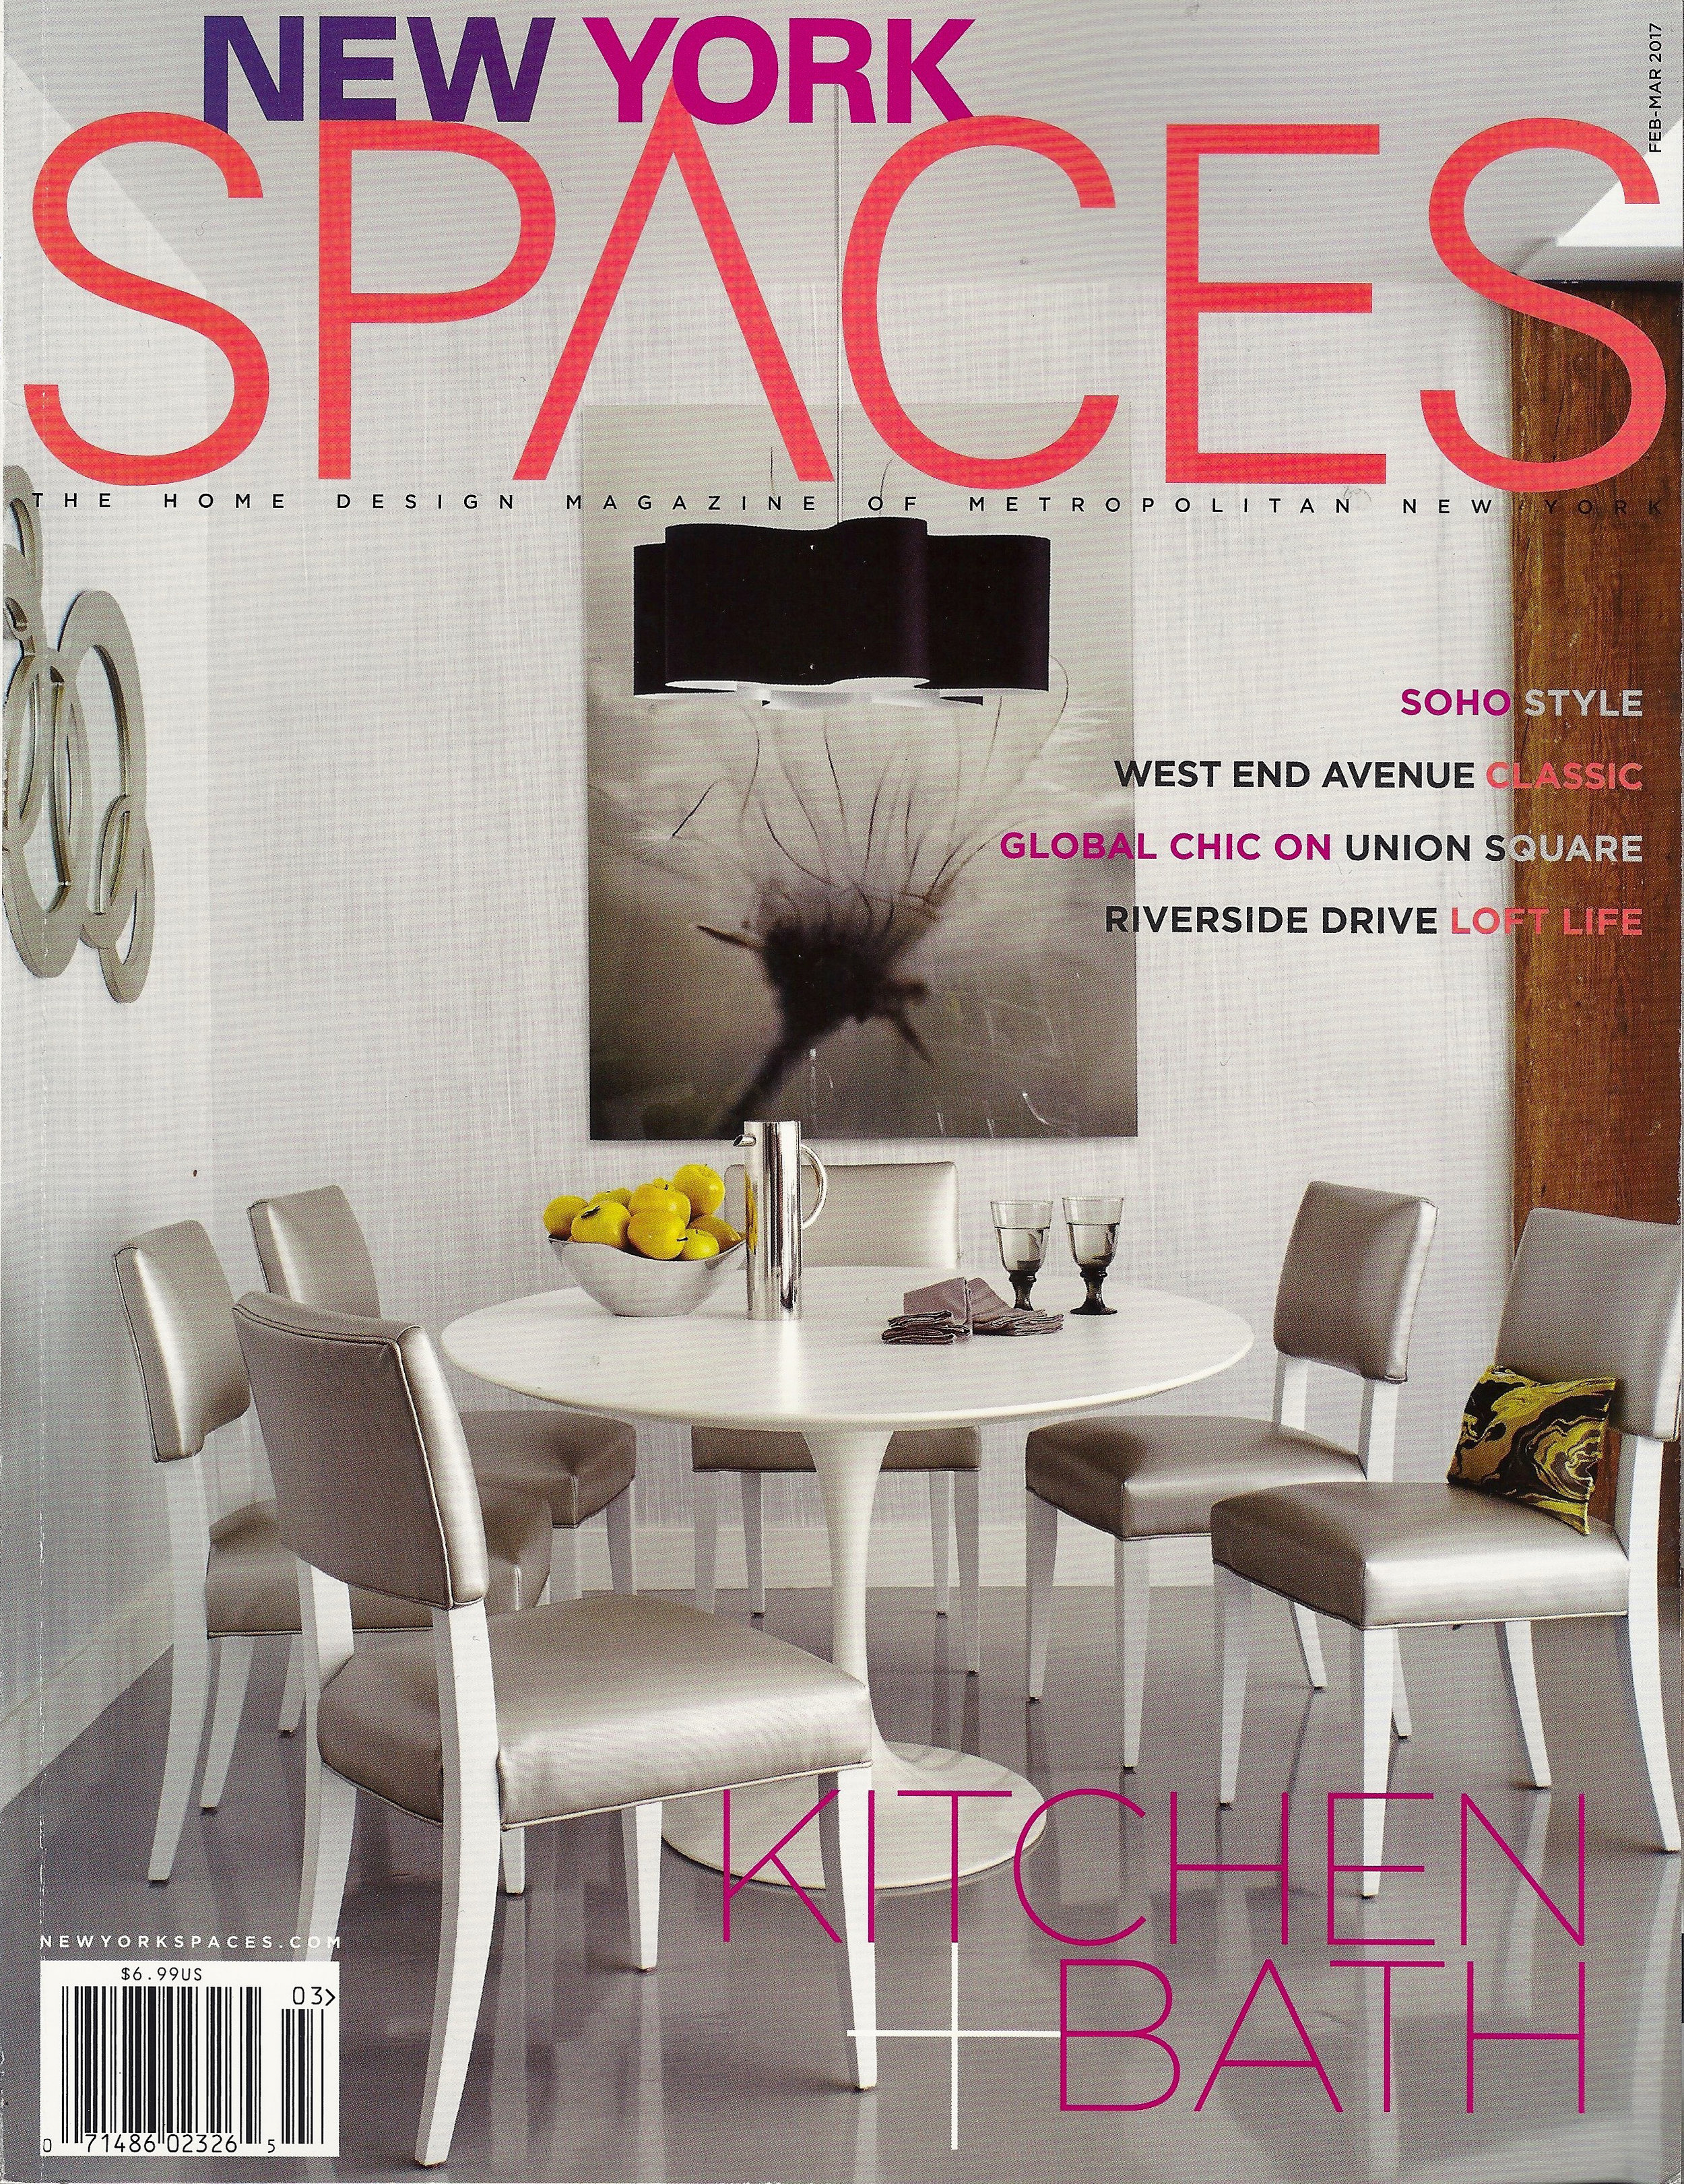 New York spaces cover feb-march 2017.jpg